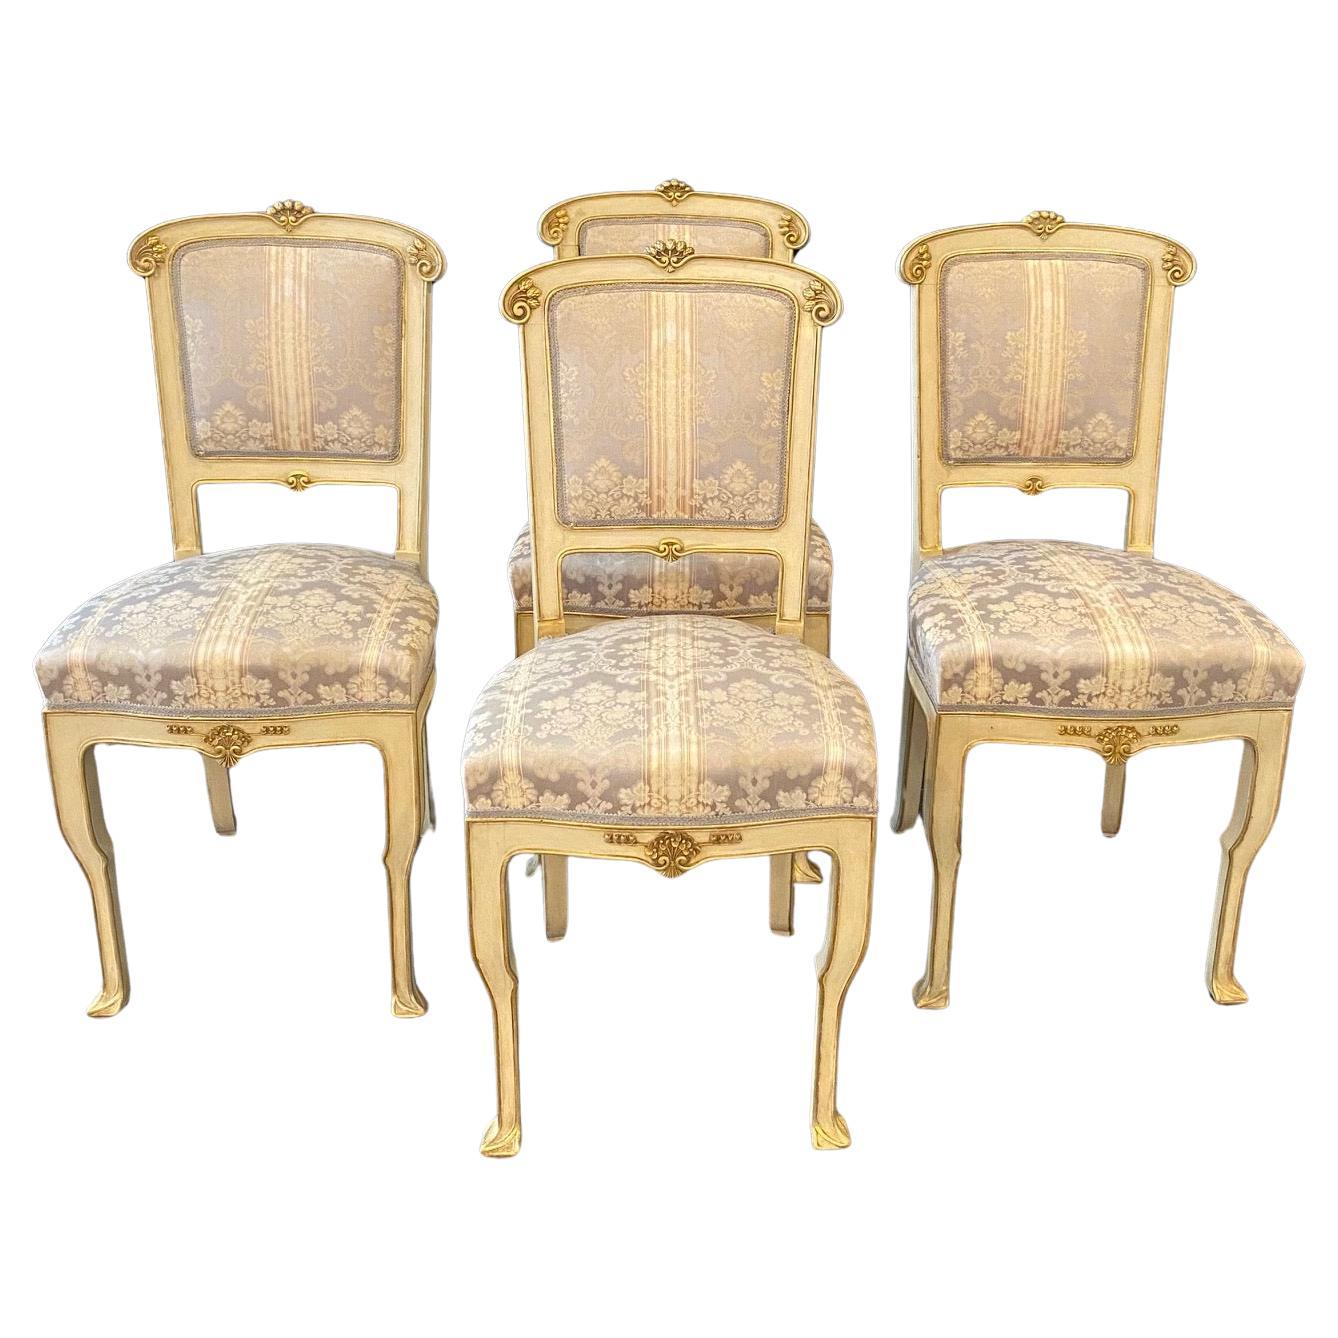 Set of 4 Italian Art Nouveau Gold Gilt and Cream Painted Dining Chairs